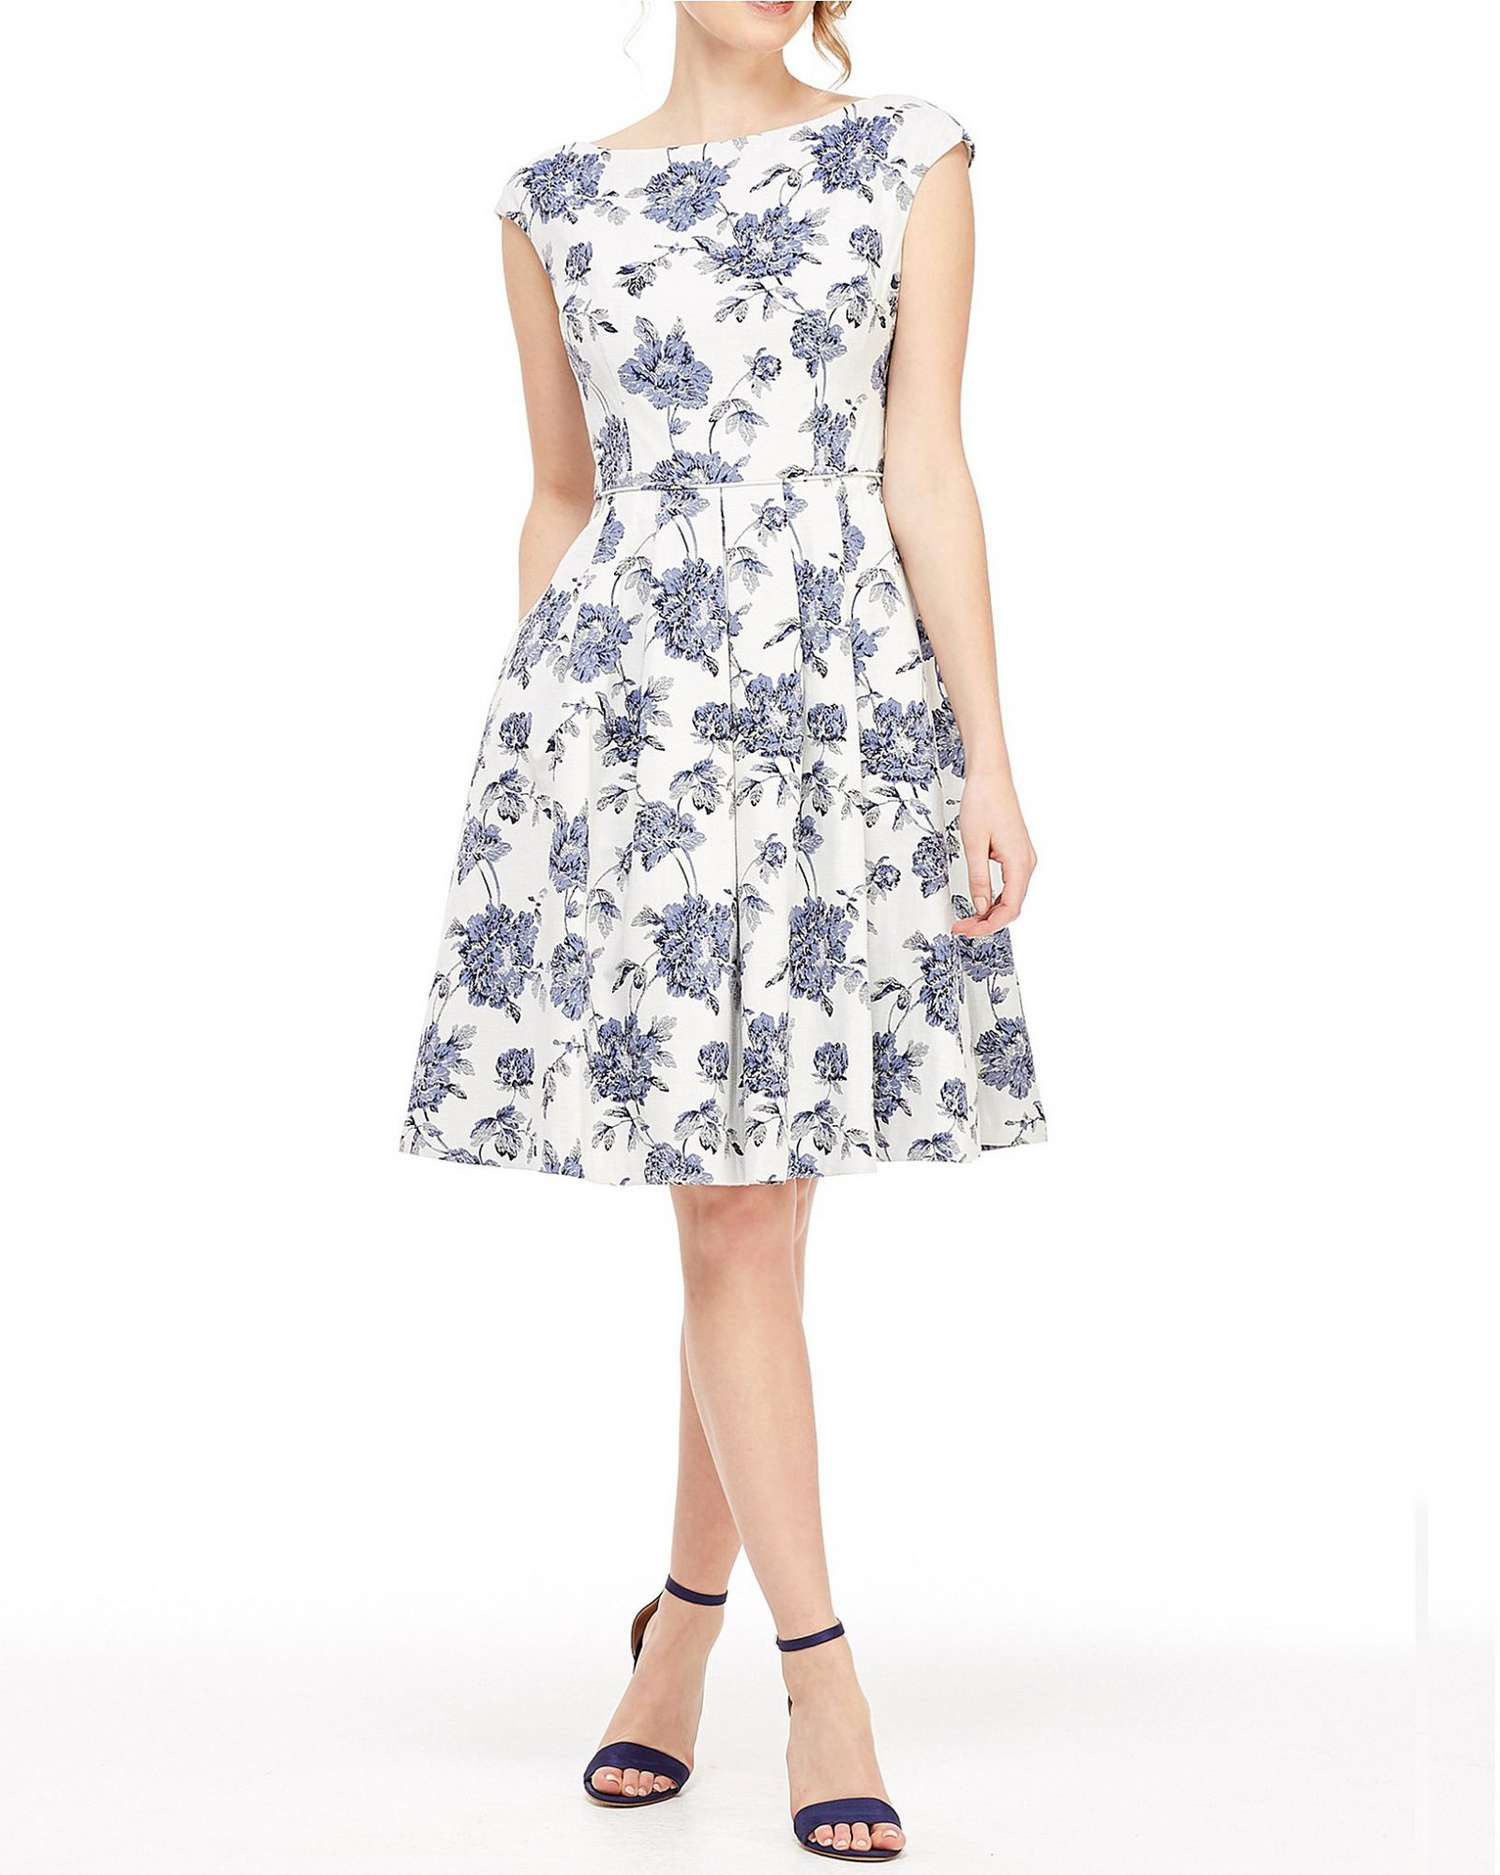 Printed Dresses Perfect for the Mothers of the Bride and Groom | Martha ...